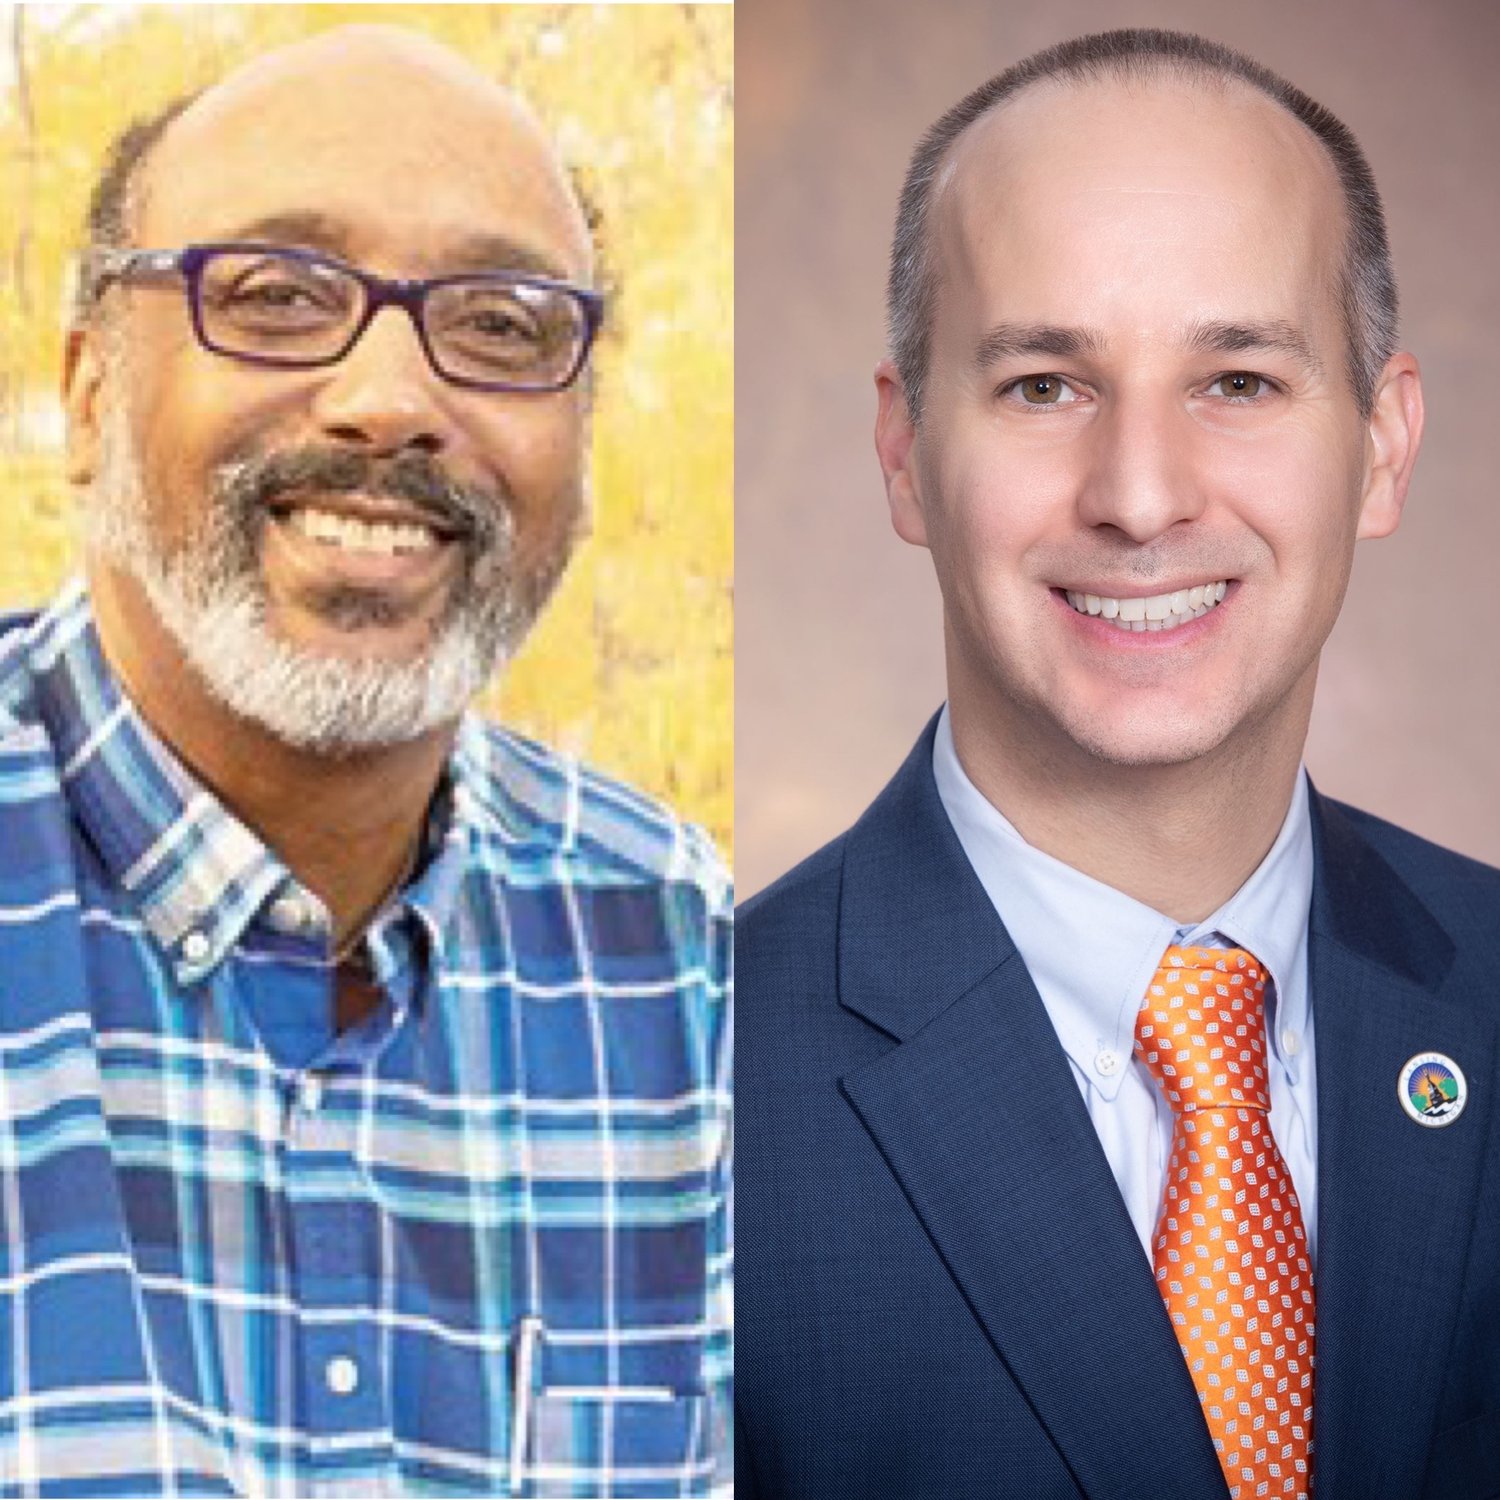 Randy Watkins (left) is the chairman of Lansing Mayor Andy Schor's (right) Inclusion and Diversity Advisory.